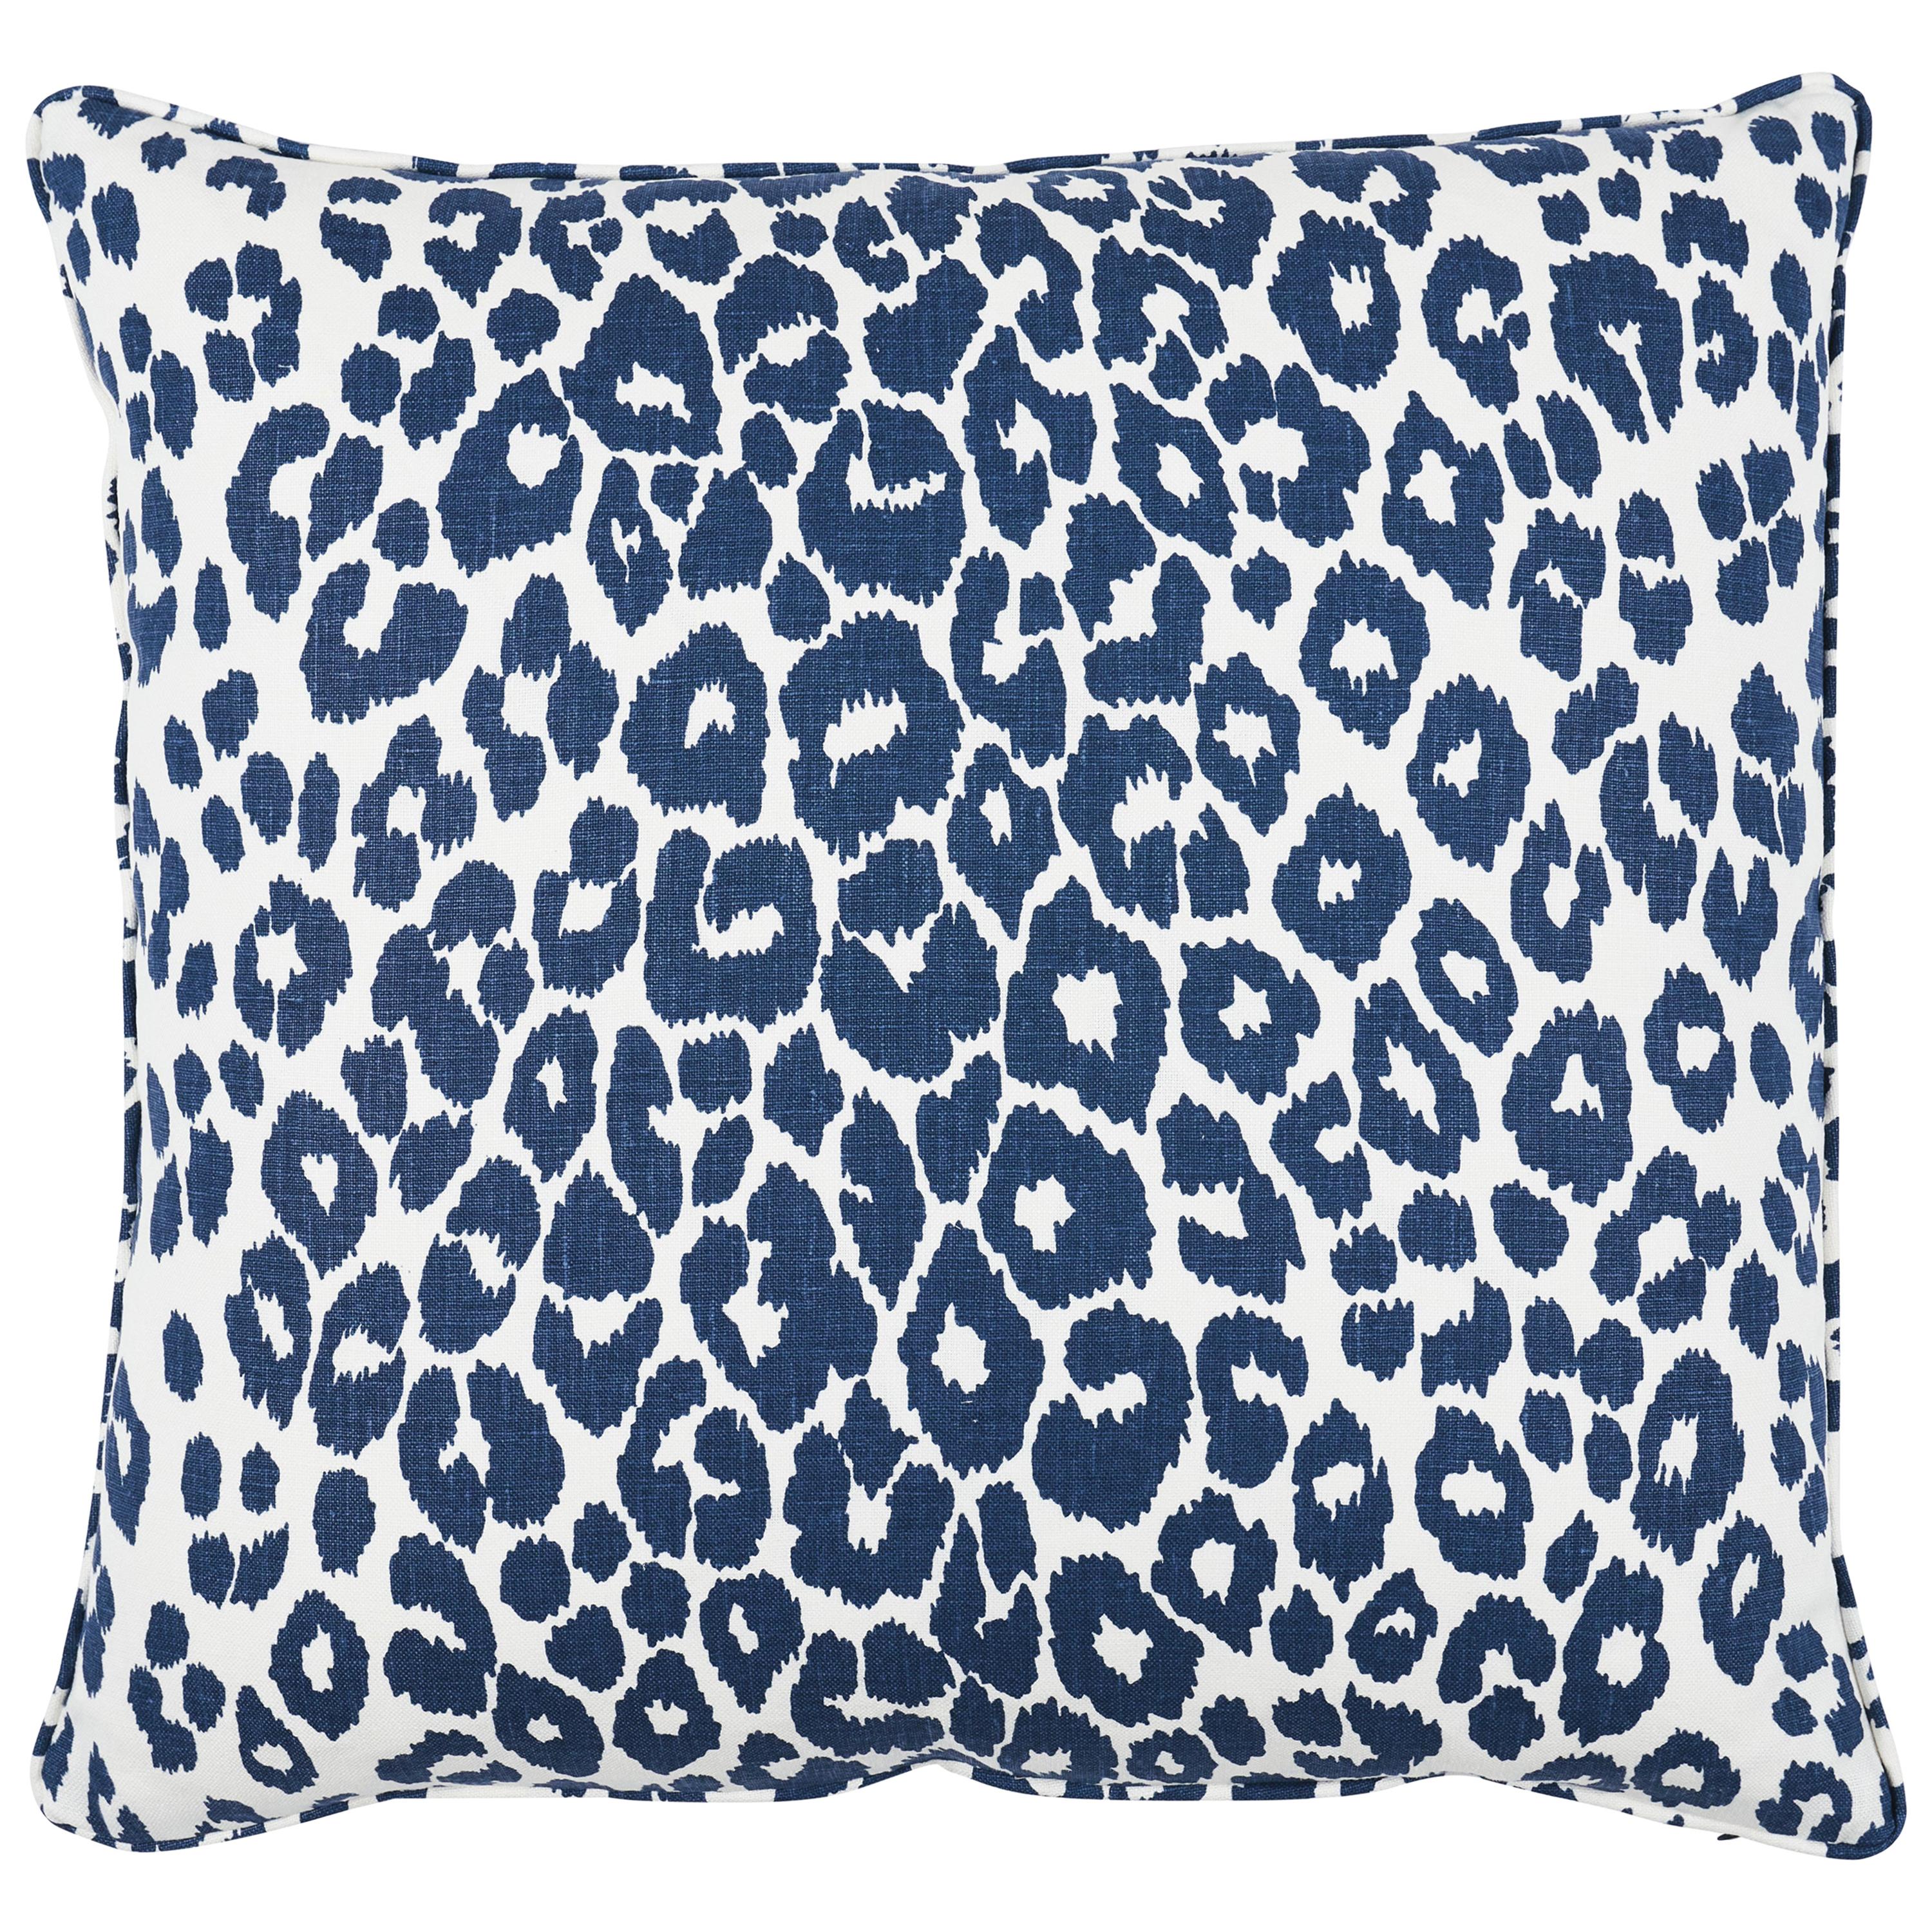 Schumacher Iconic Leopard Pillow in Ink For Sale